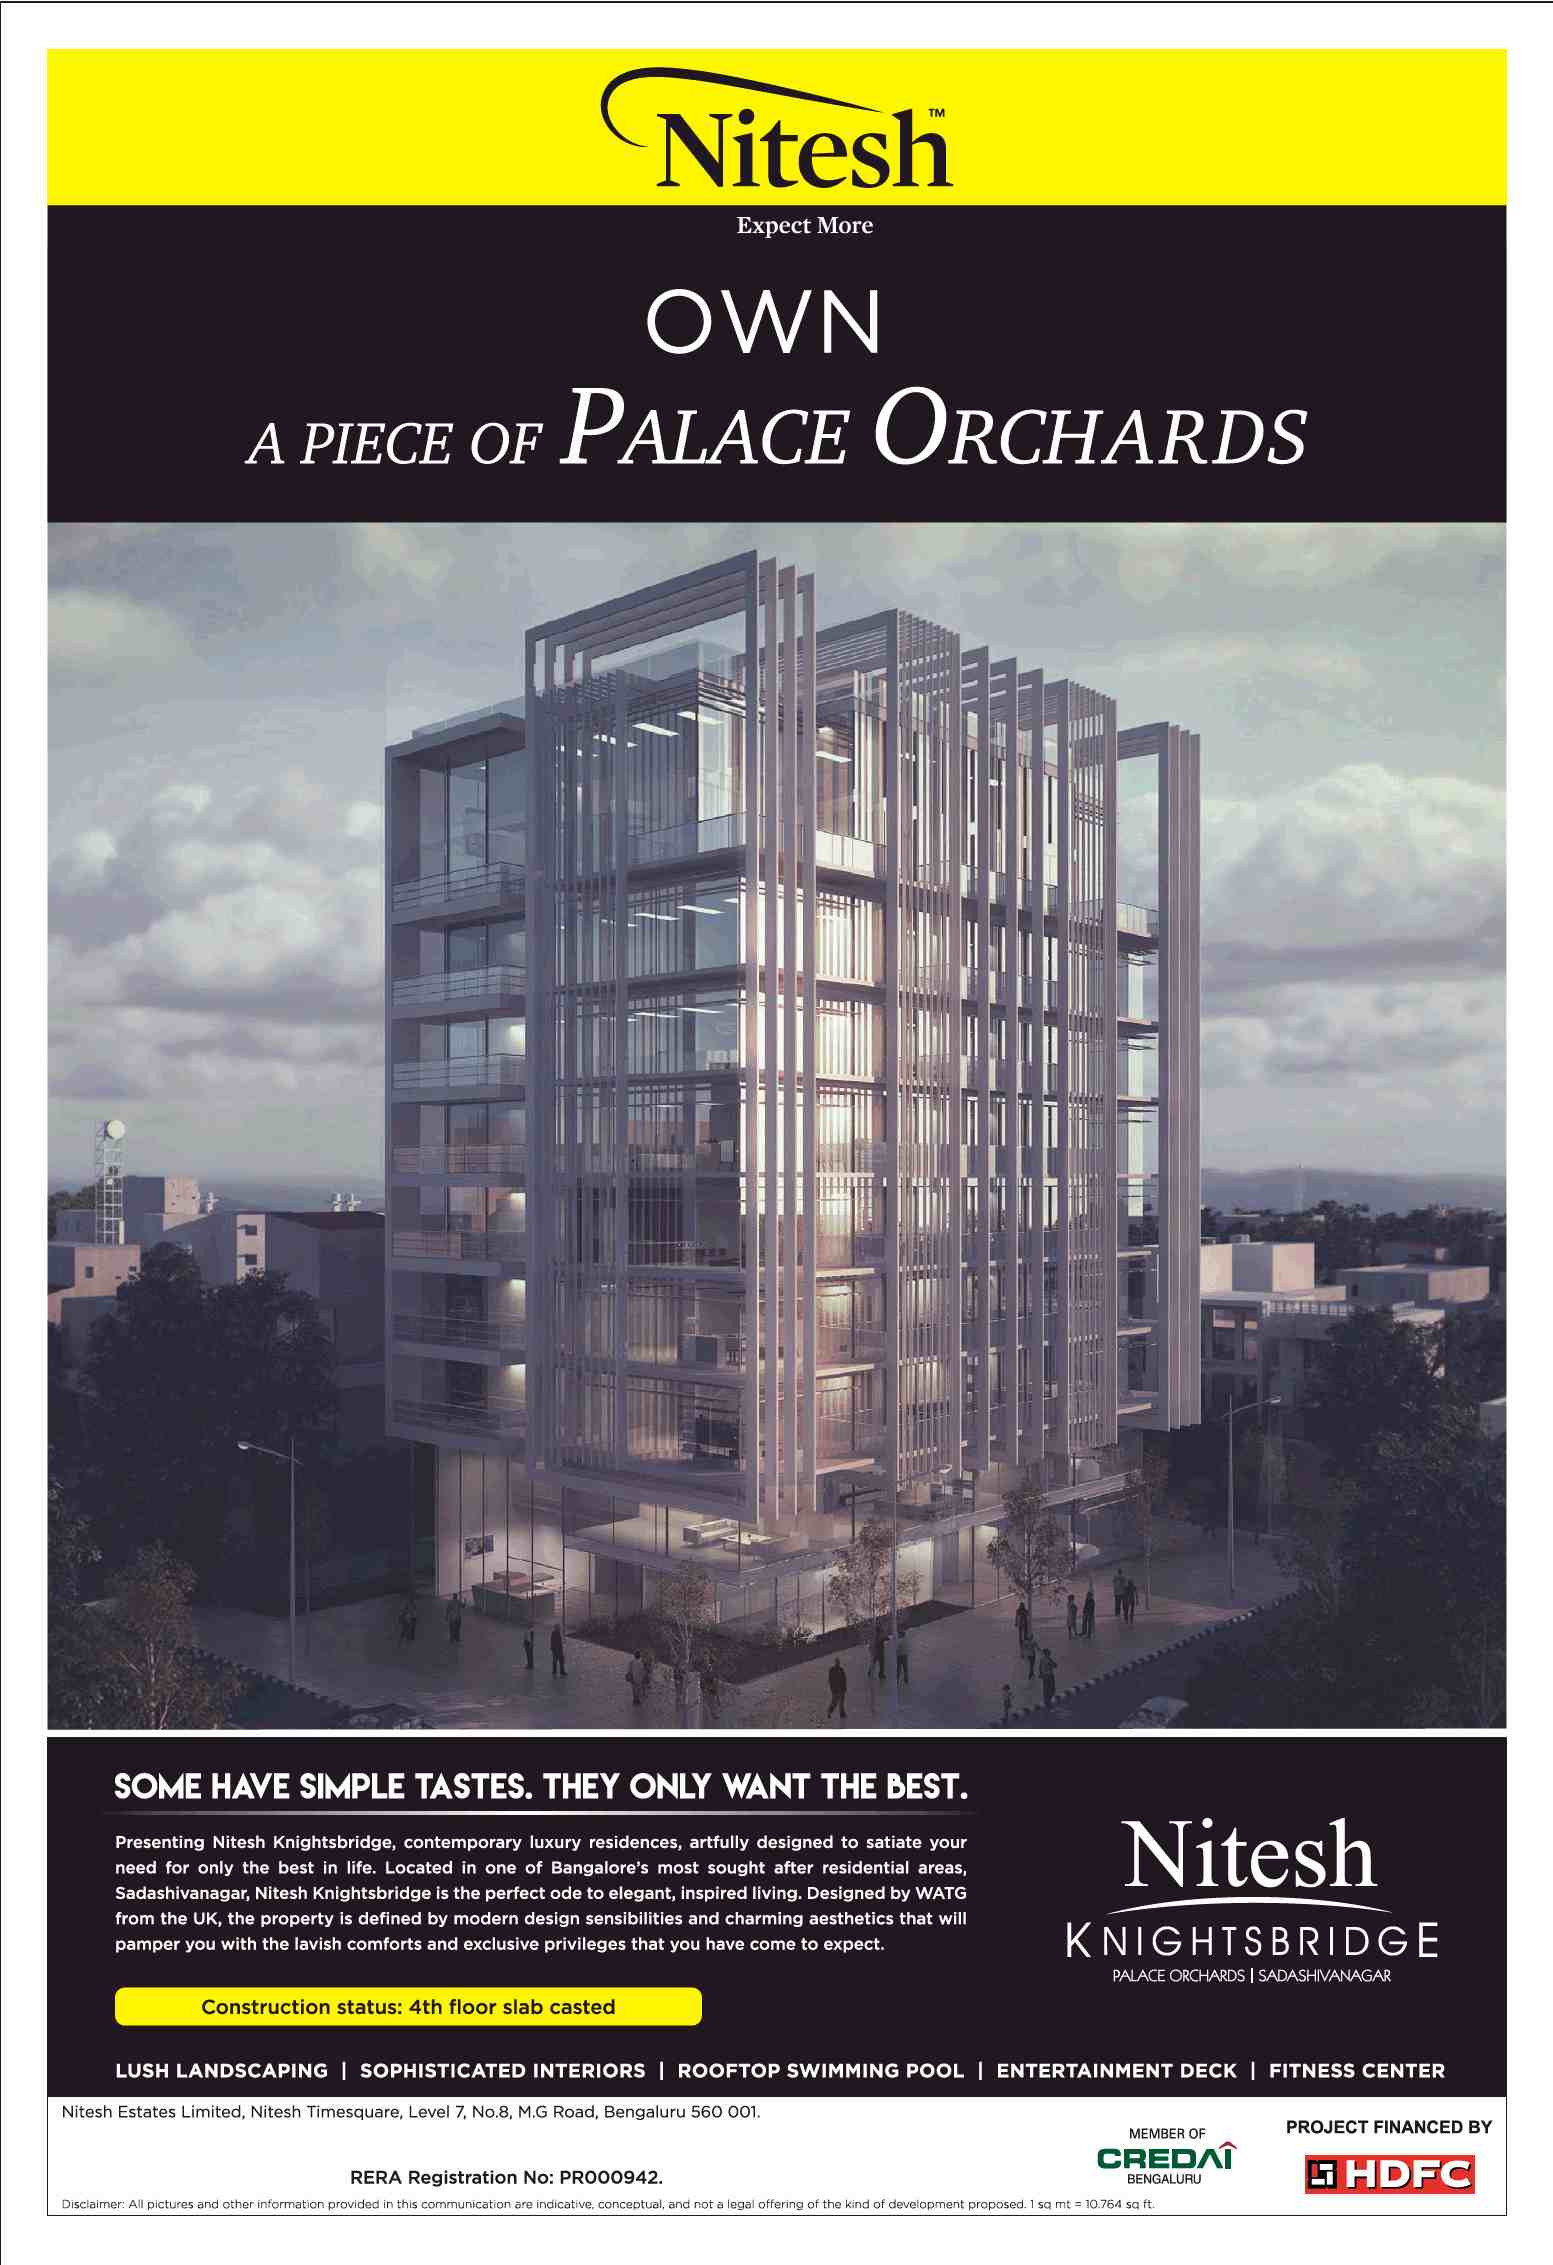 Experience lavish comforts and exclusive privileges at Nitesh Knightsbridge in Bangalore Update